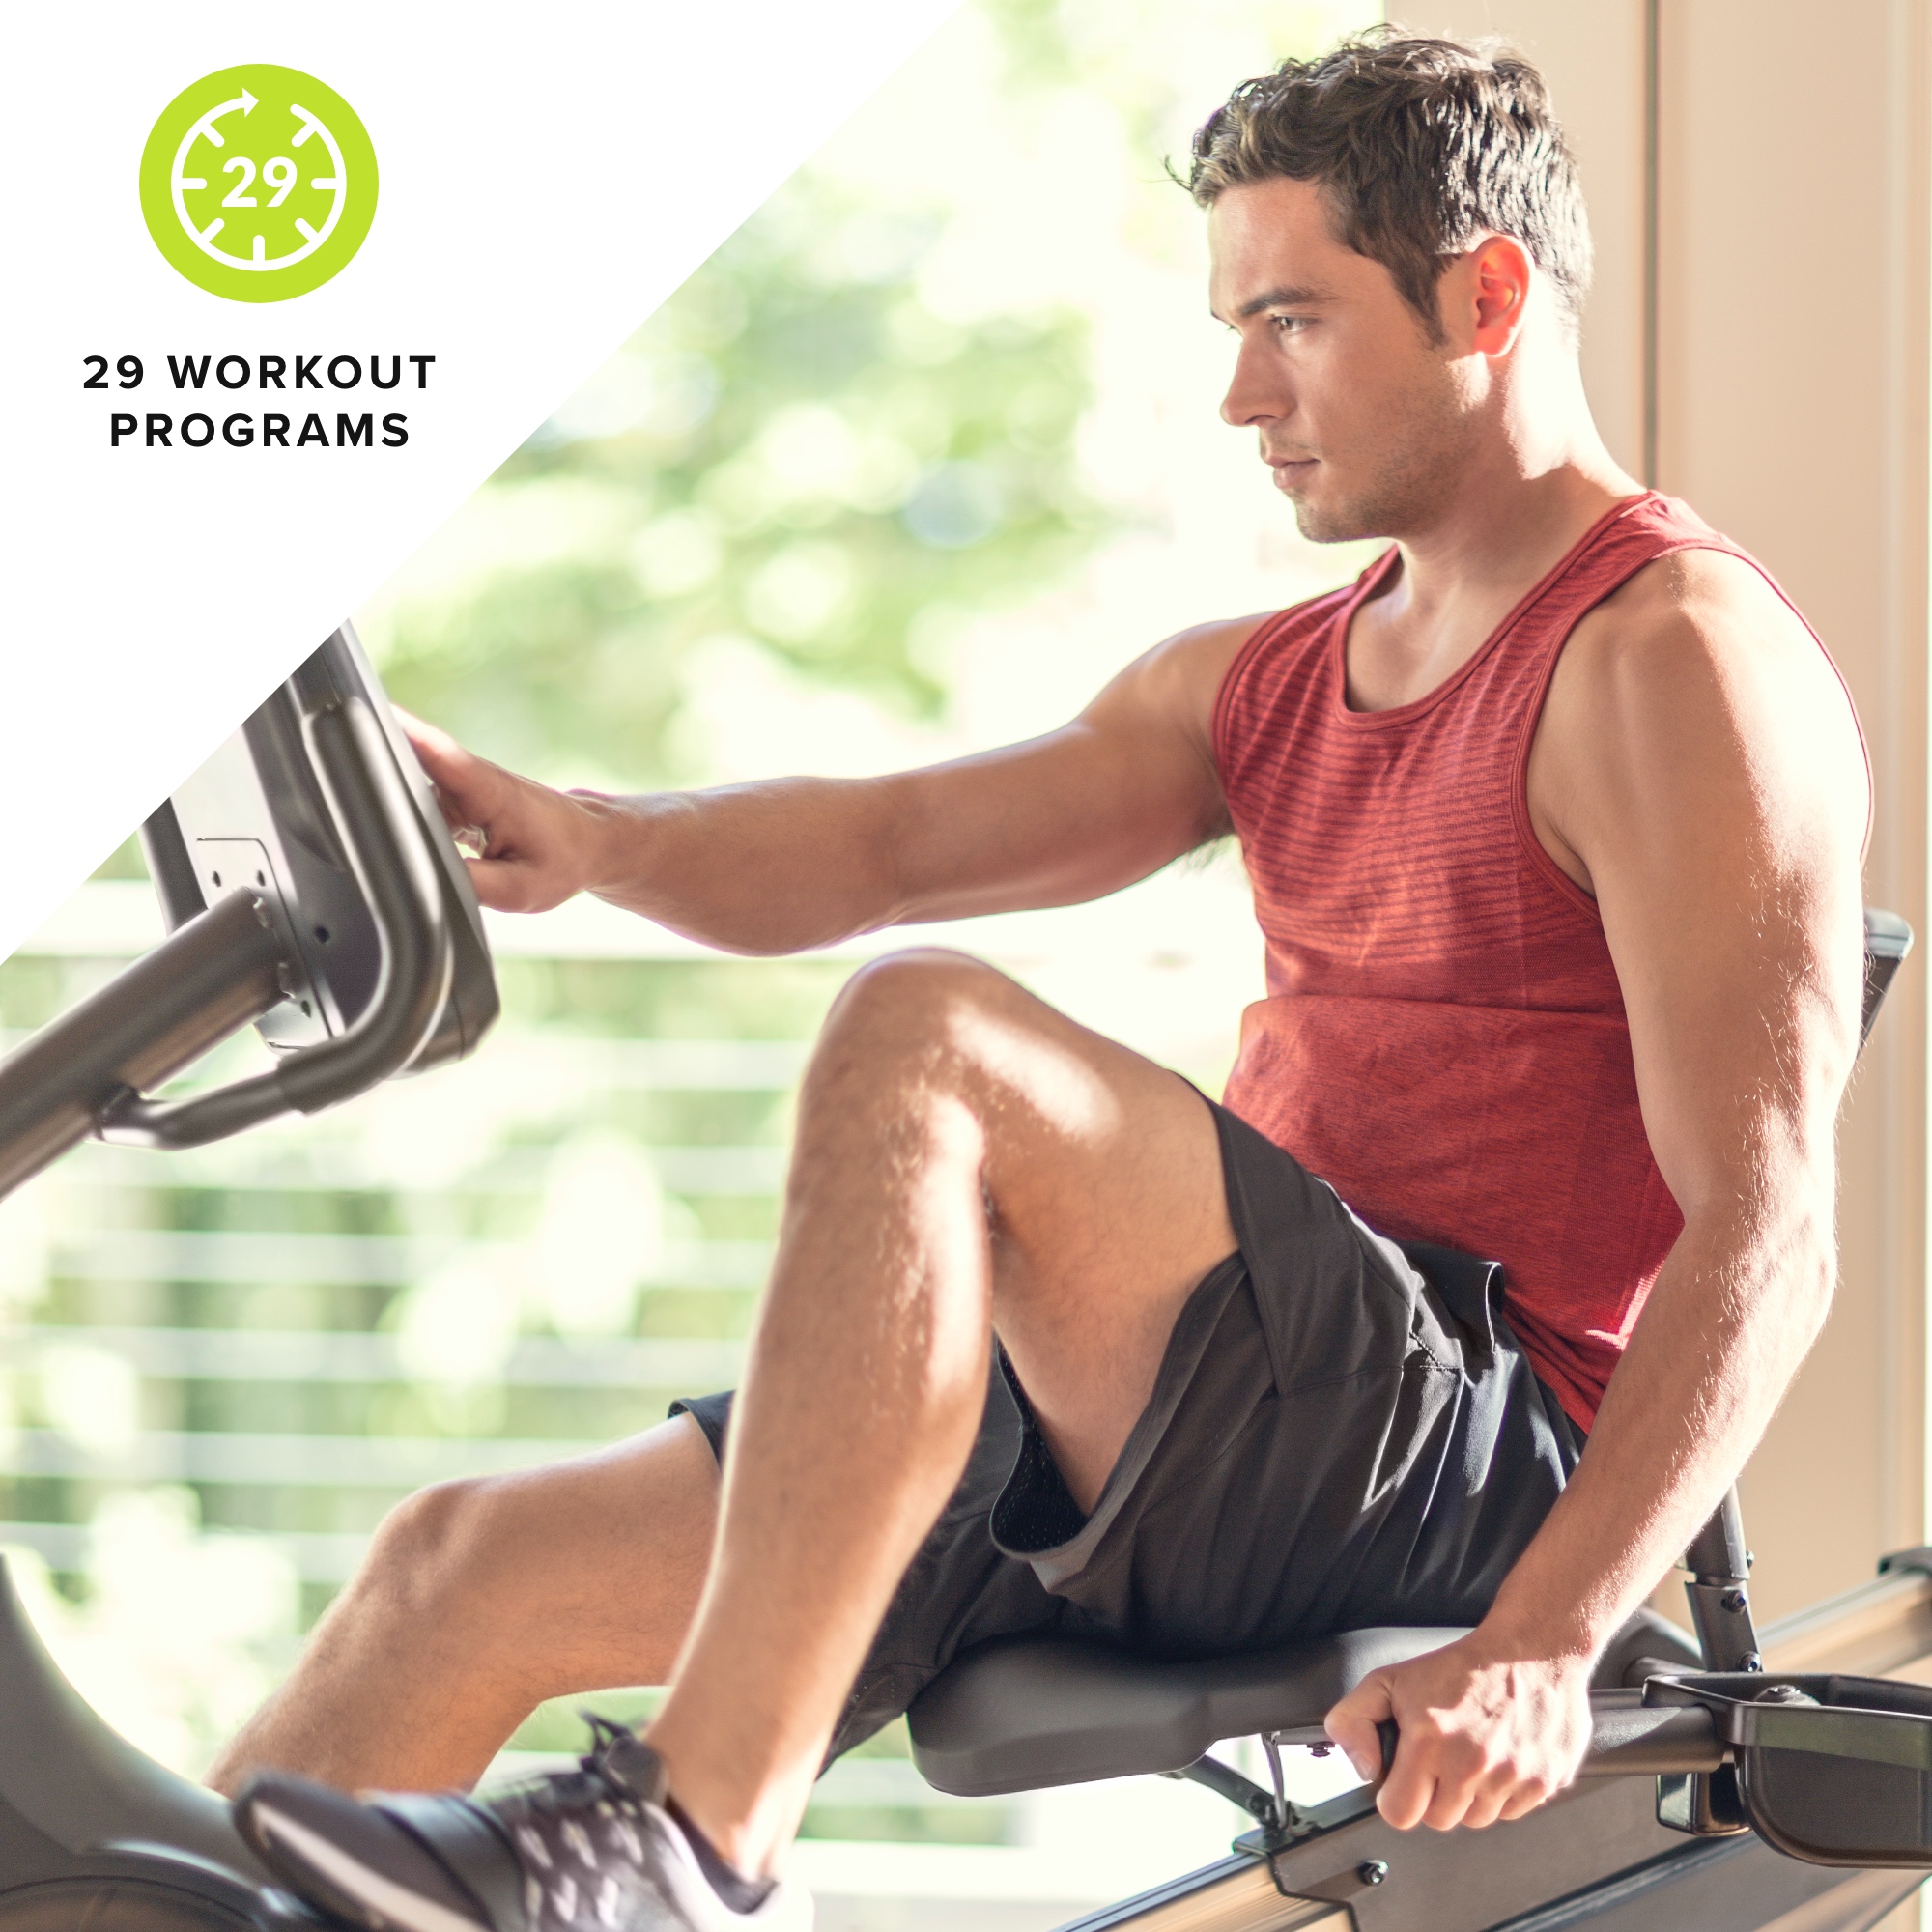 Schwinn 270 Recumbent Exercise Bike with Explore the World Compatibility - image 7 of 14